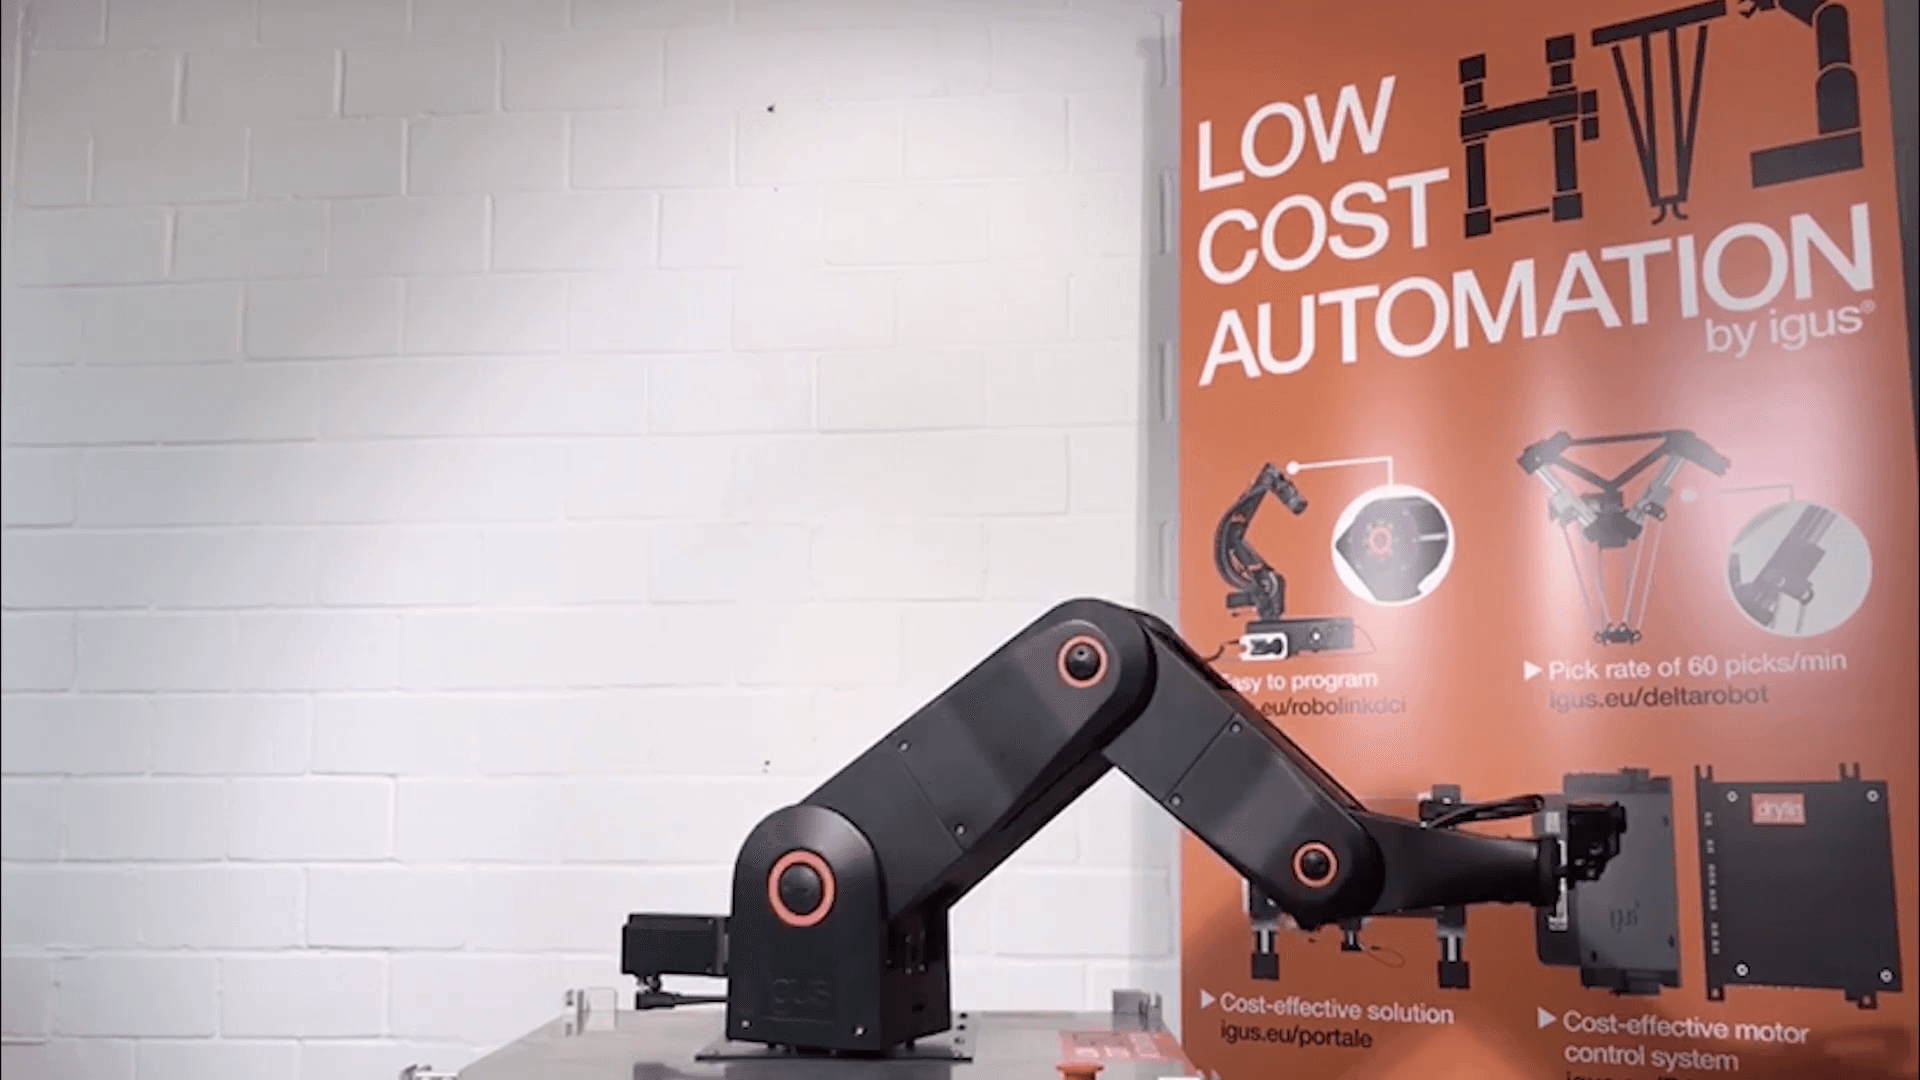 Five-axis robot and GoPro provide all-round visibility